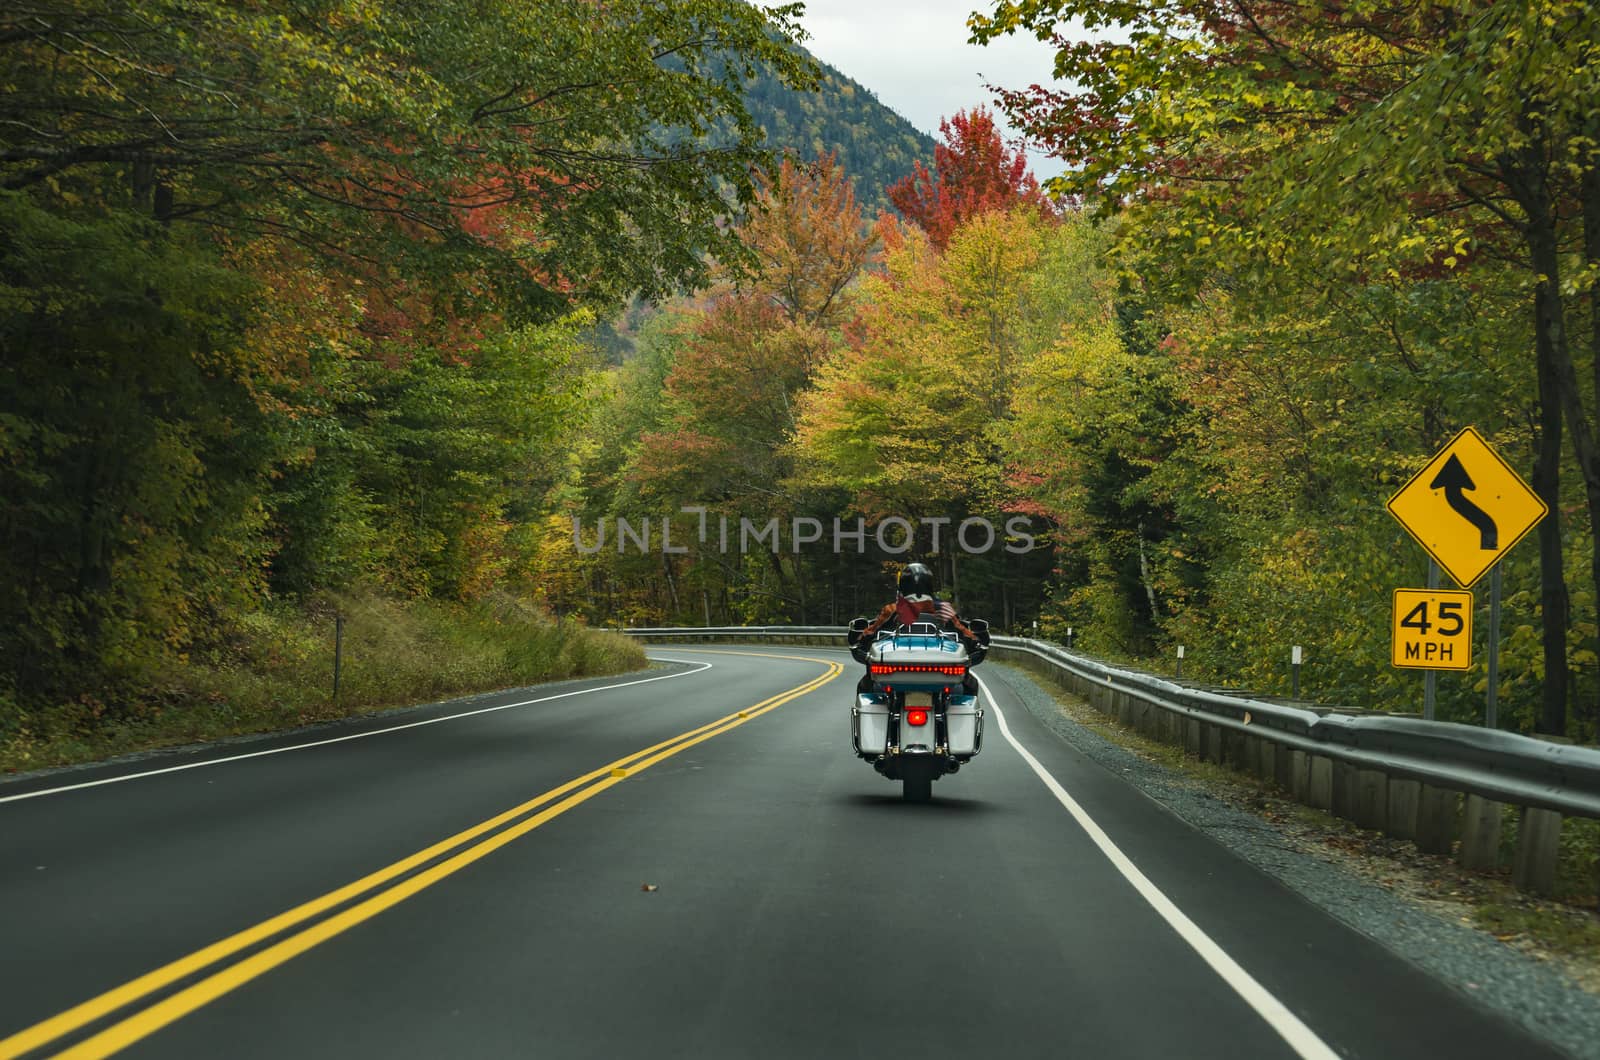 Motorcycle driving on the road on the White Mountains during the fall, New Hampshire, USA